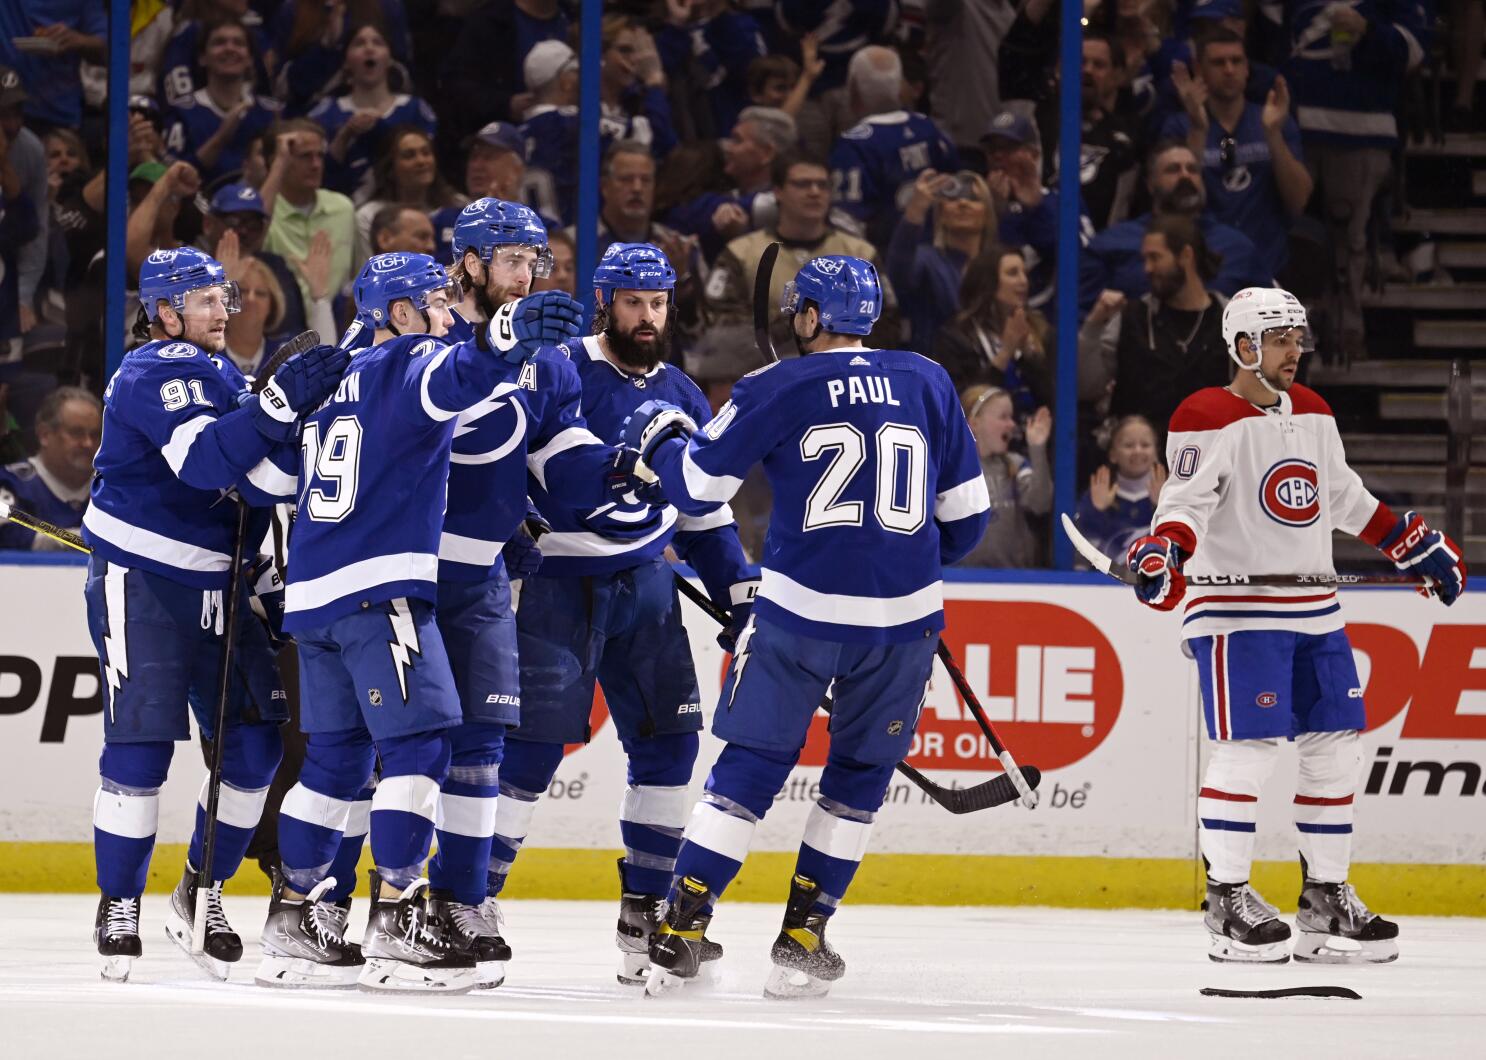 Hagel completes hat trick as Lightning score 3 unanswered in 3rd period to  down Canadiens